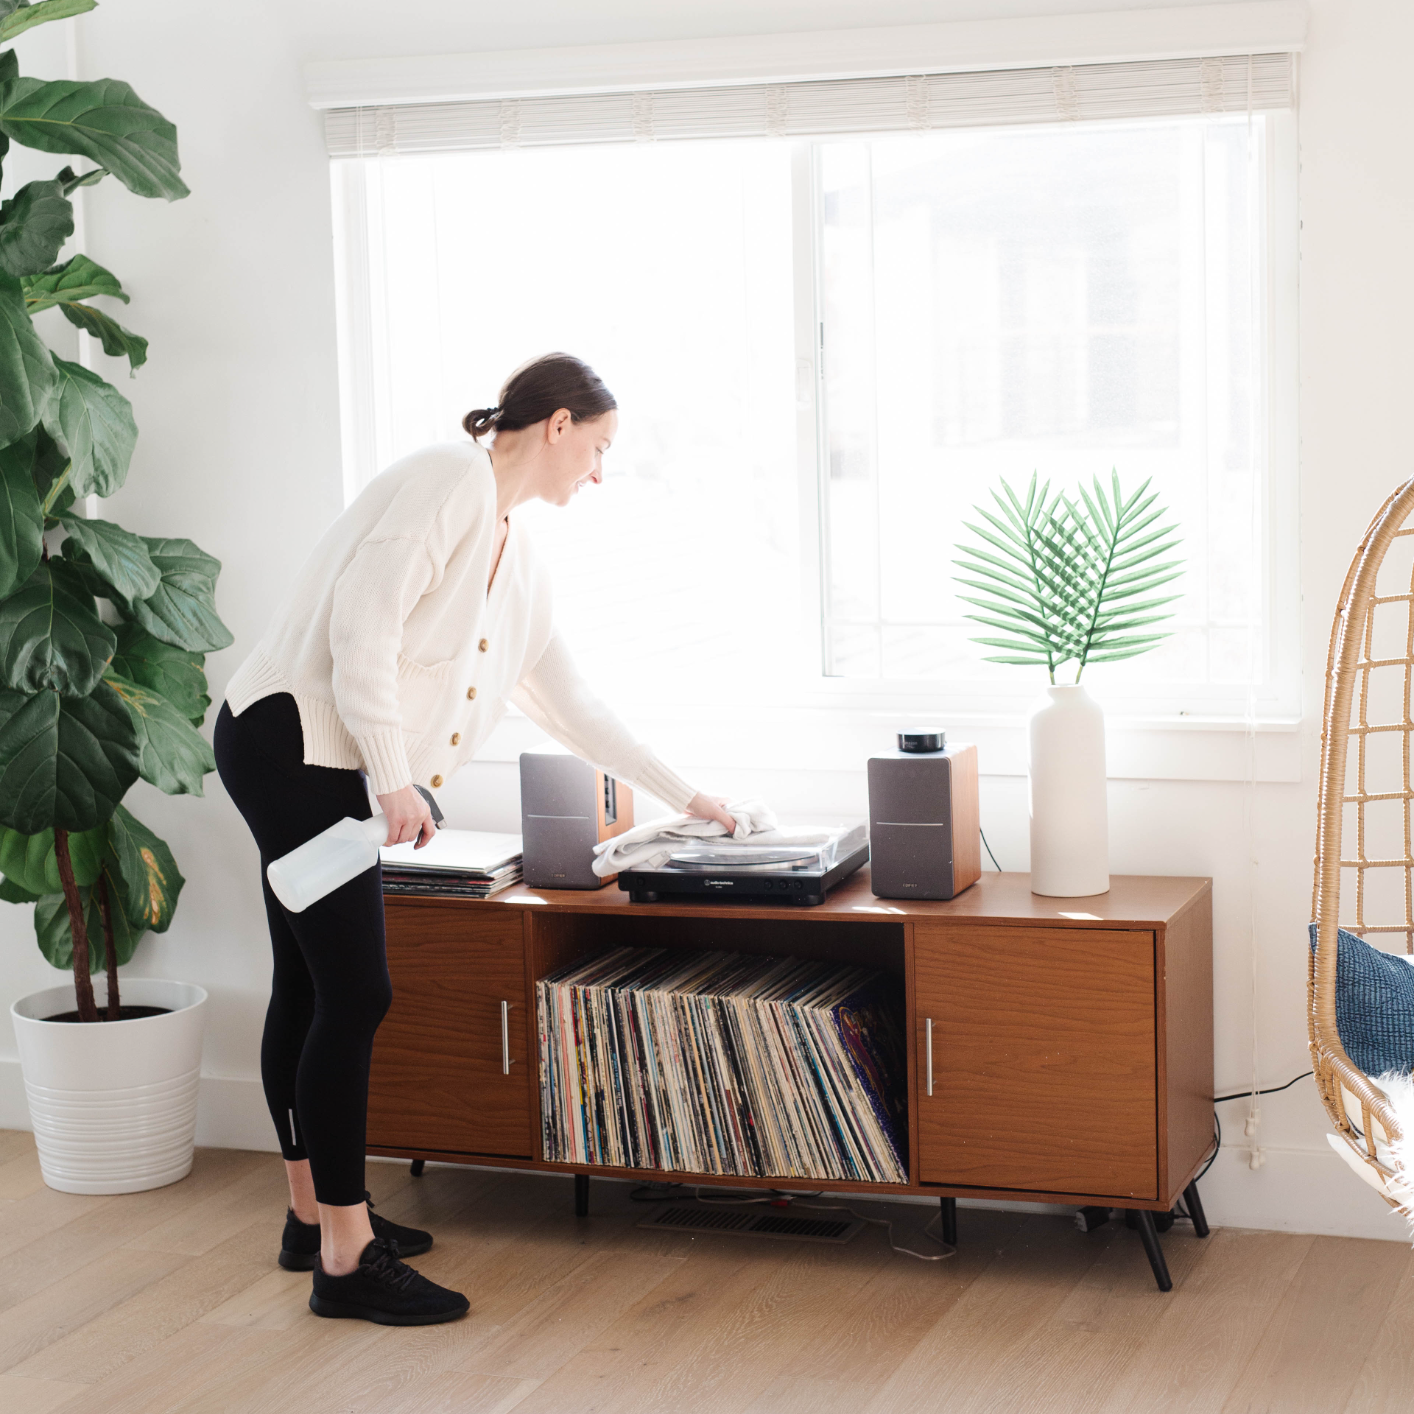 woman dusting a vinyl record player on a side table holding vinyl albums wondering how often to dust